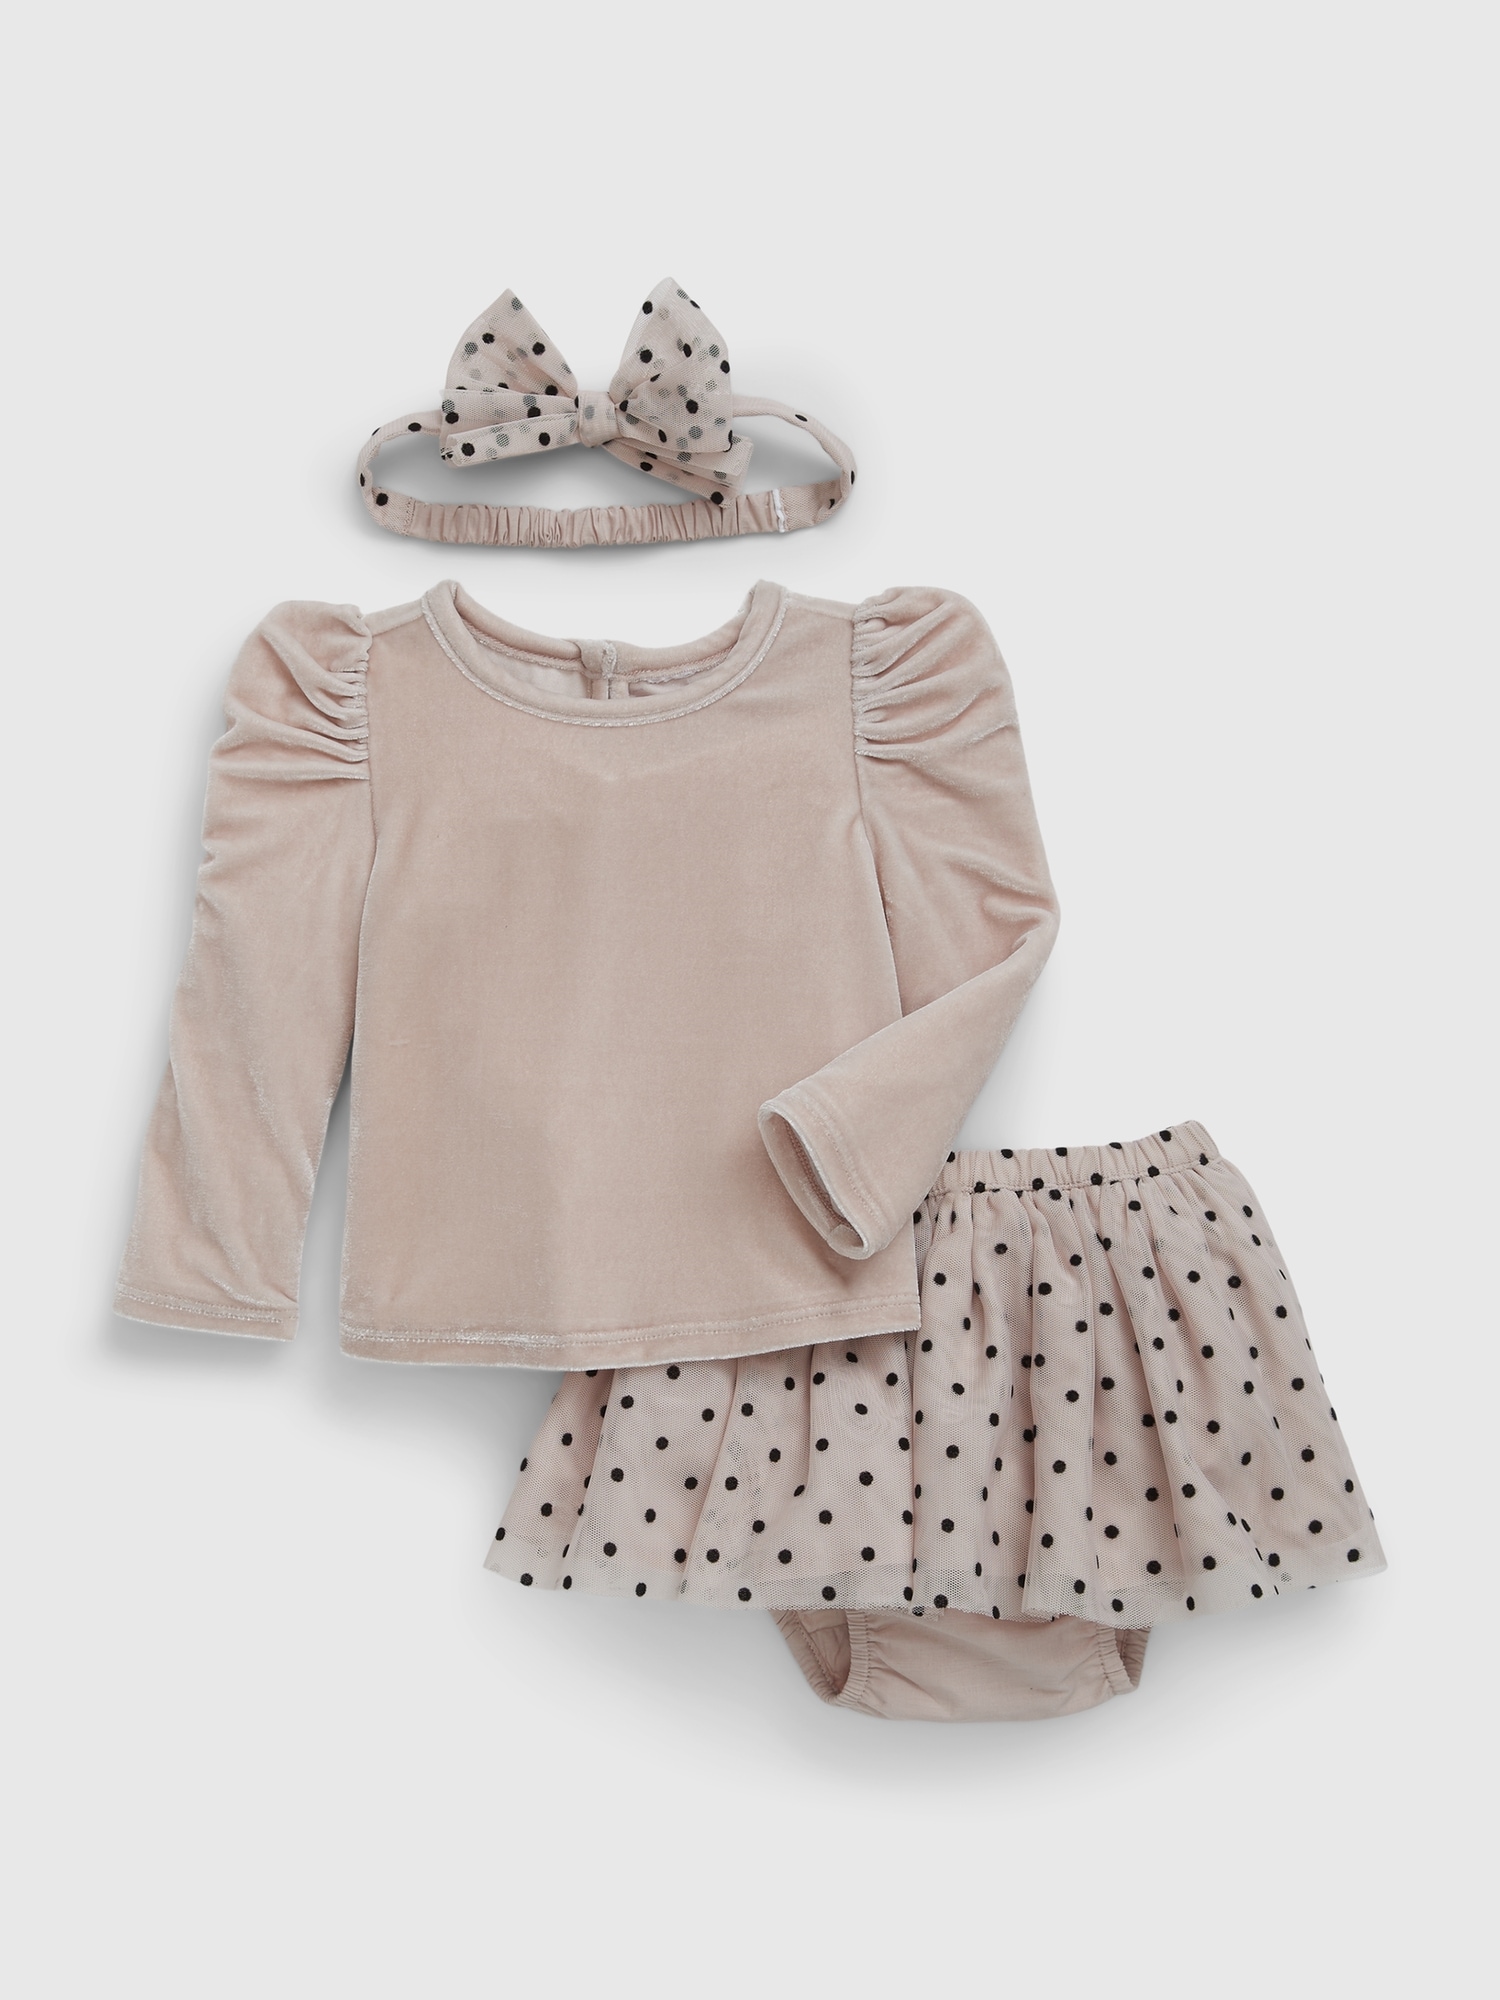 Gap Baby Three-Piece Outfit Set